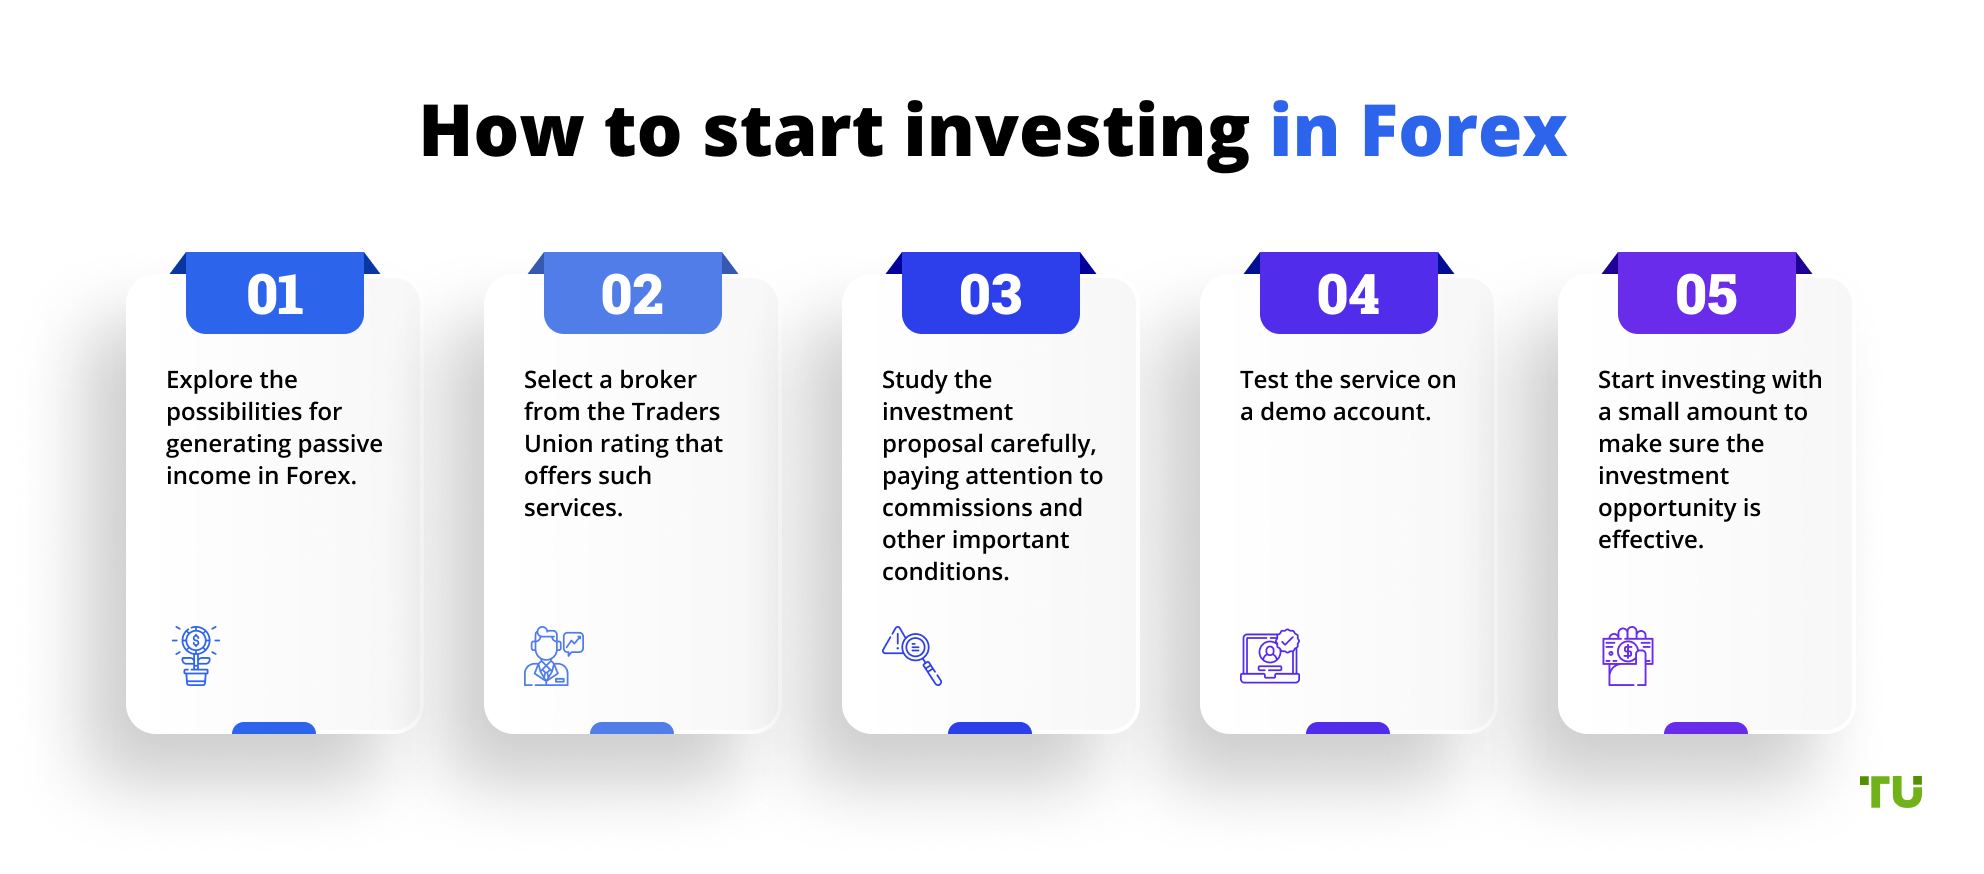 How to start investing in Forex